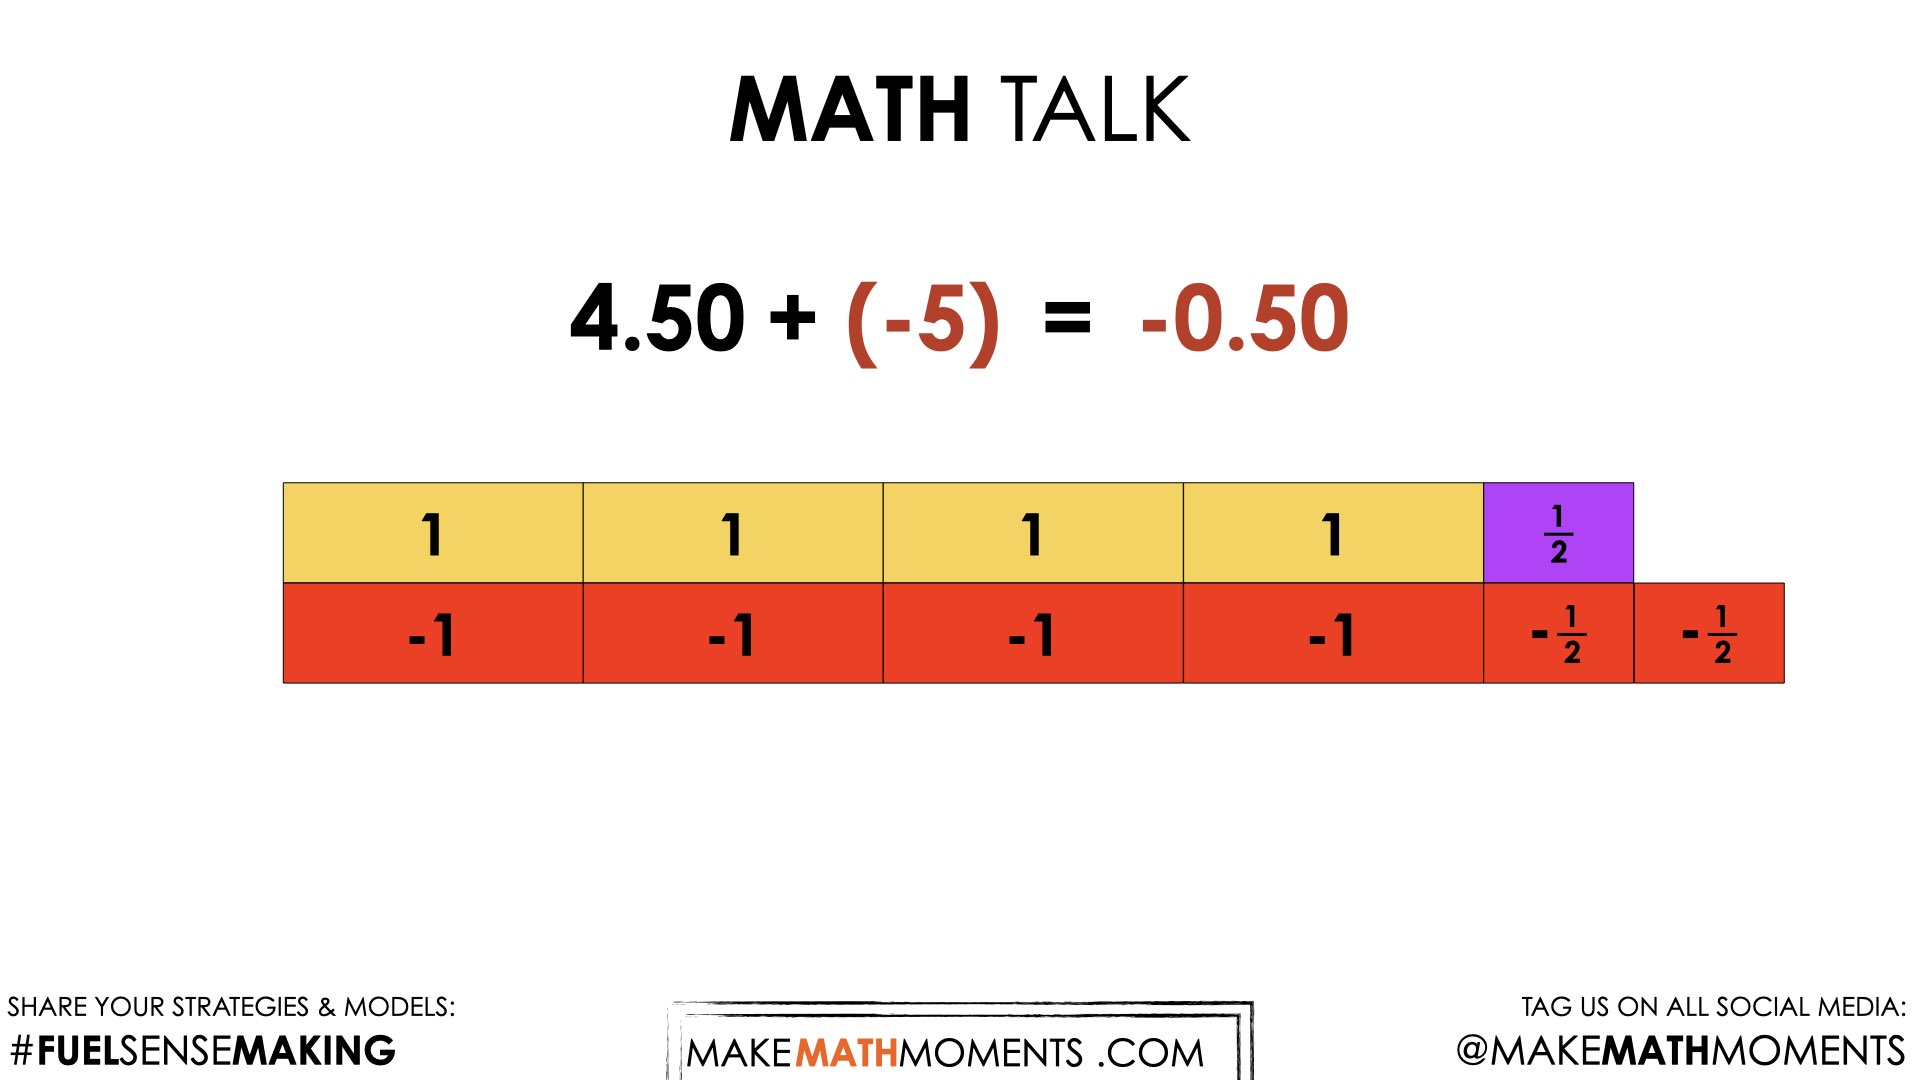 Piggy Bank Revisited [Day 5] - Show Your Growth - 03 - MATH TALK Silent Solution Animation Image 2.001